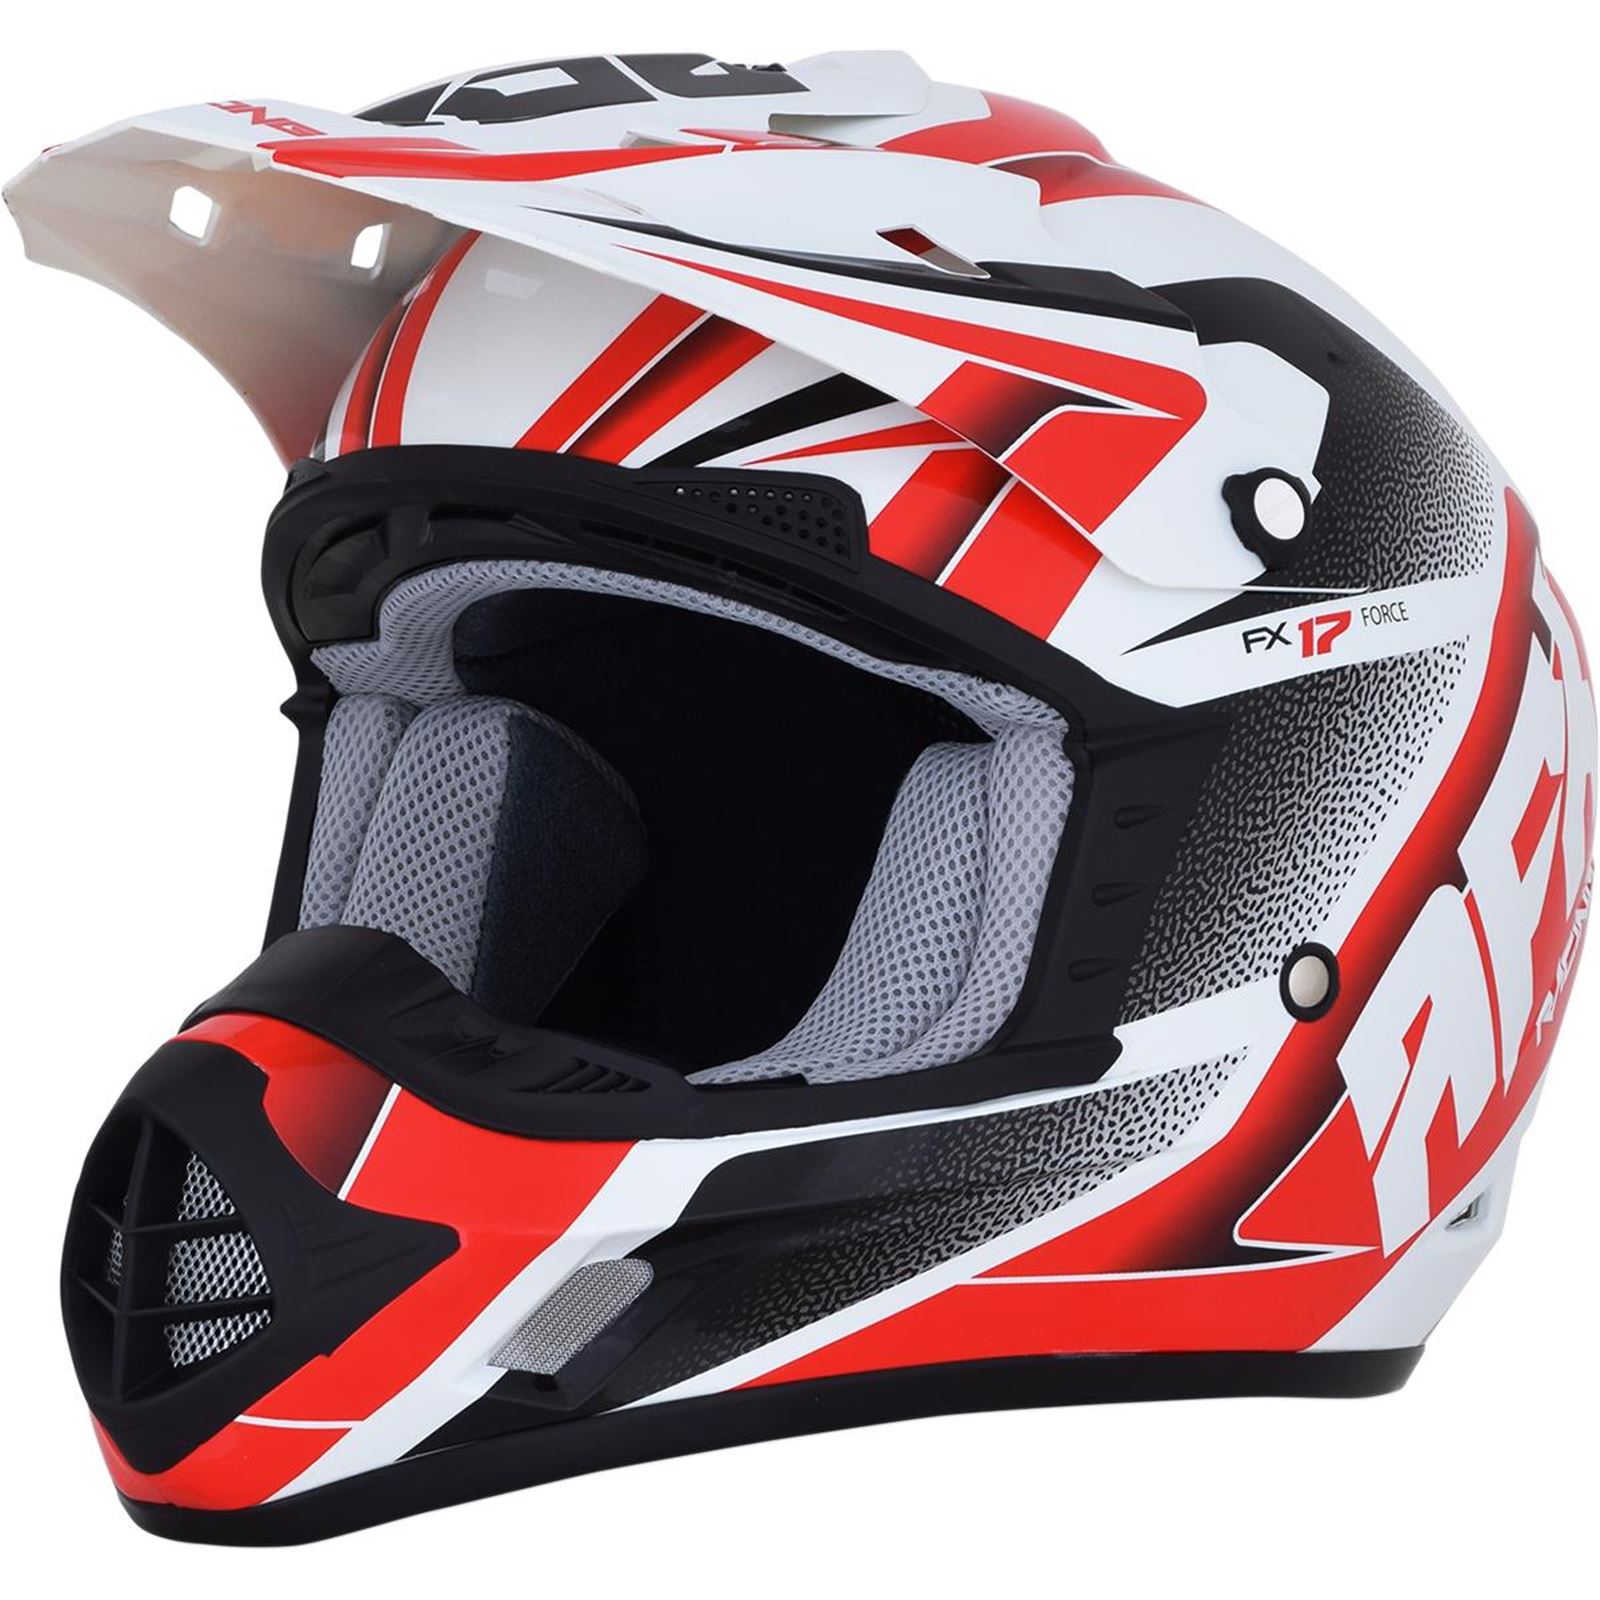 AFX FX-17 Helmet - Force - Pearl White/Red - Large